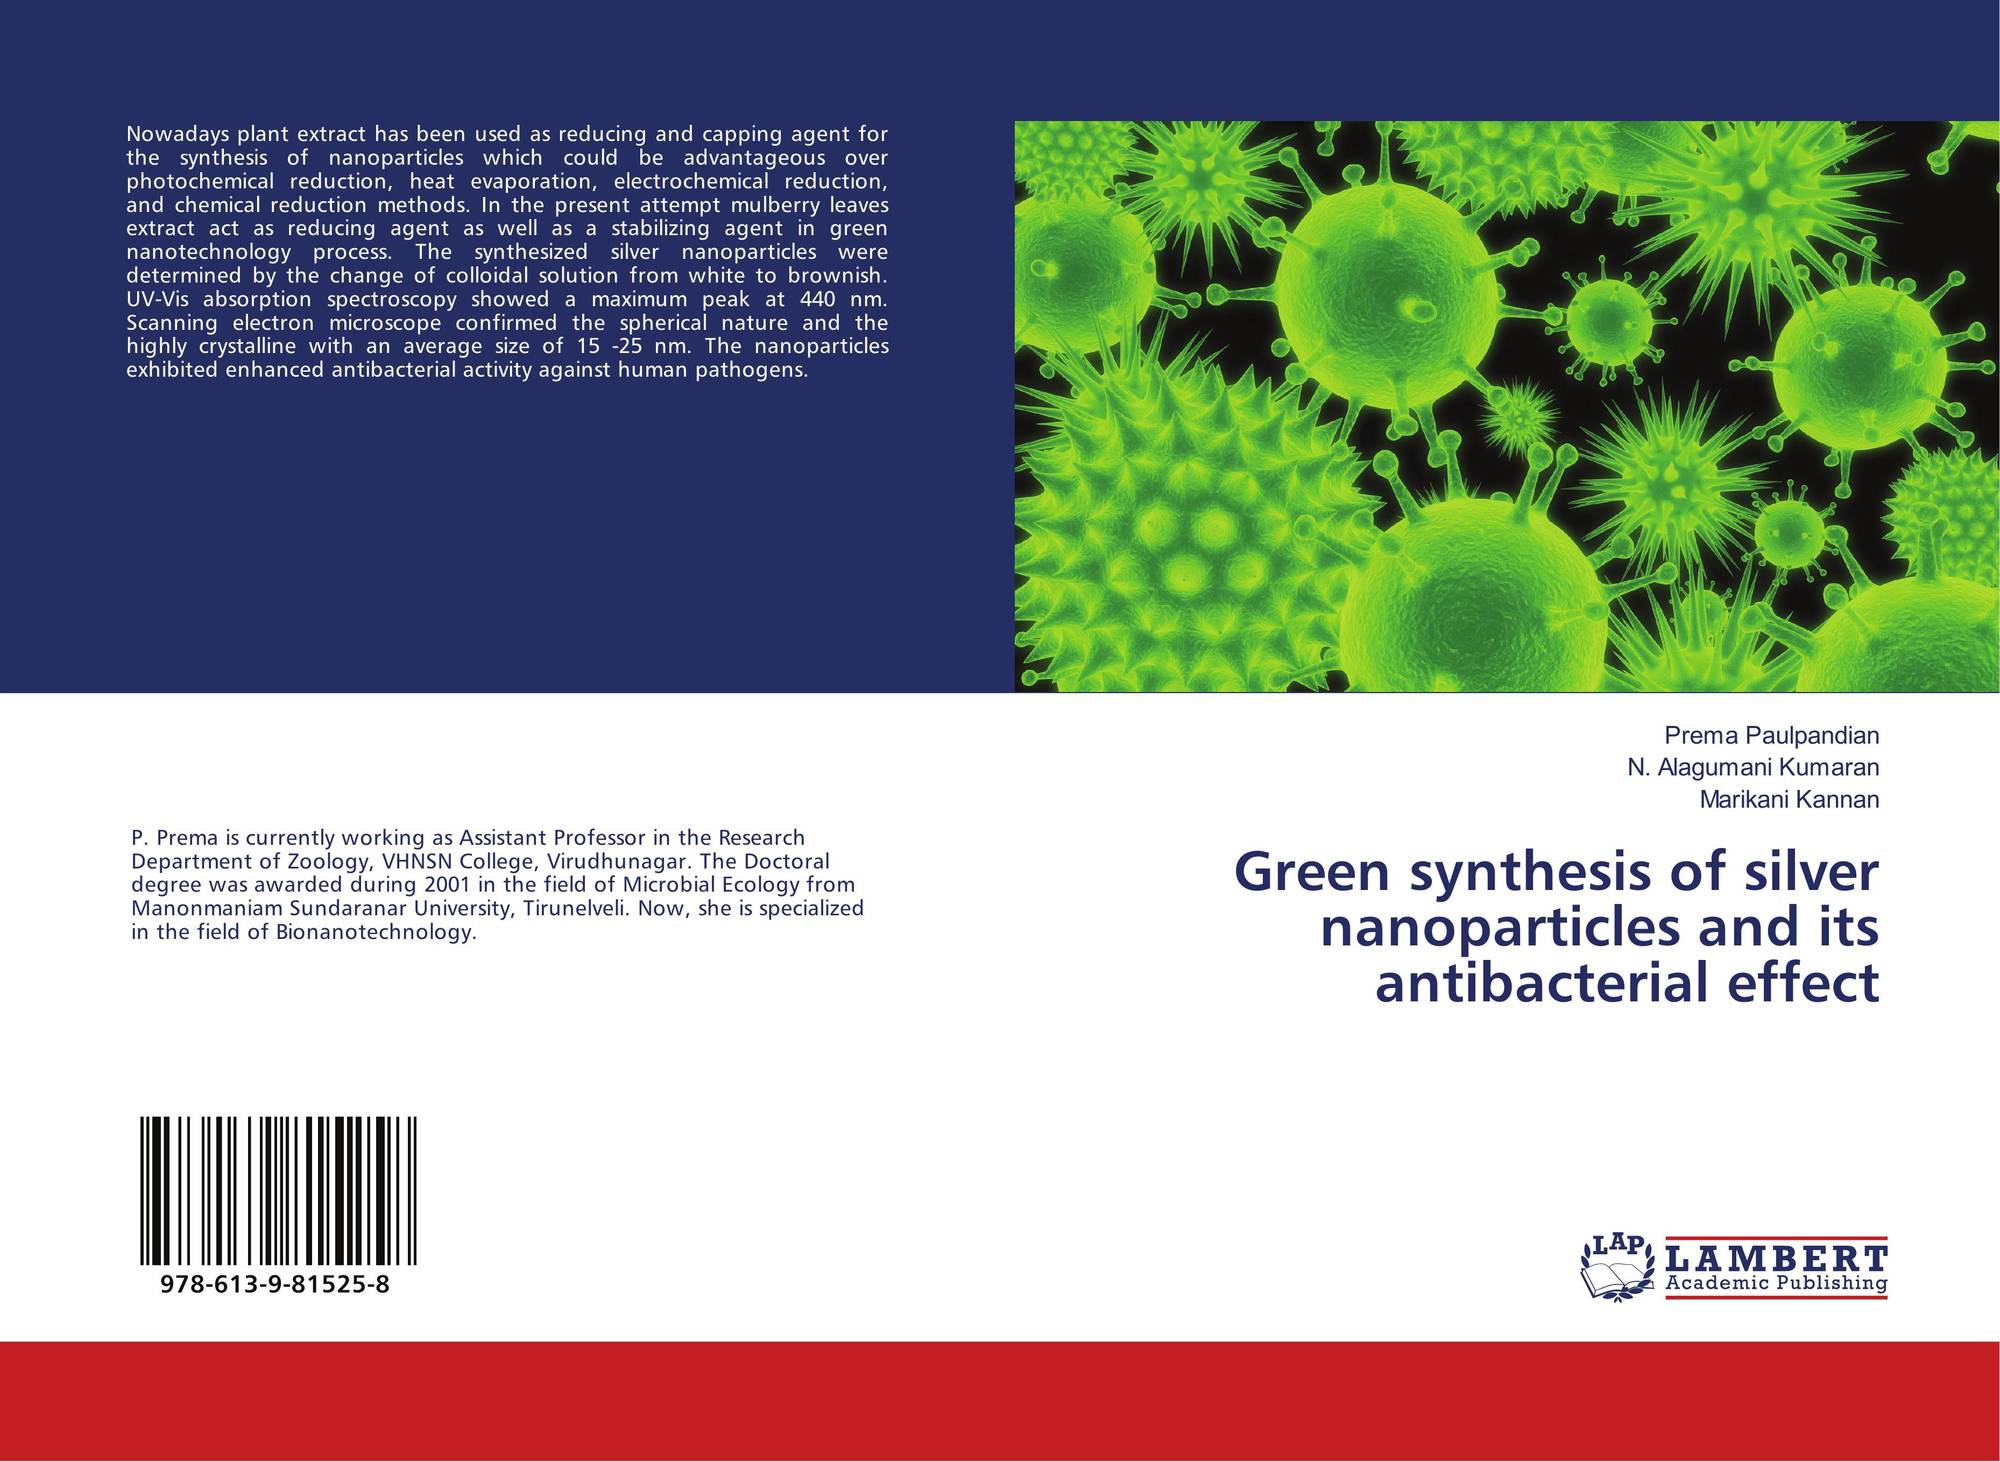 literature review of green synthesis of silver nanoparticles